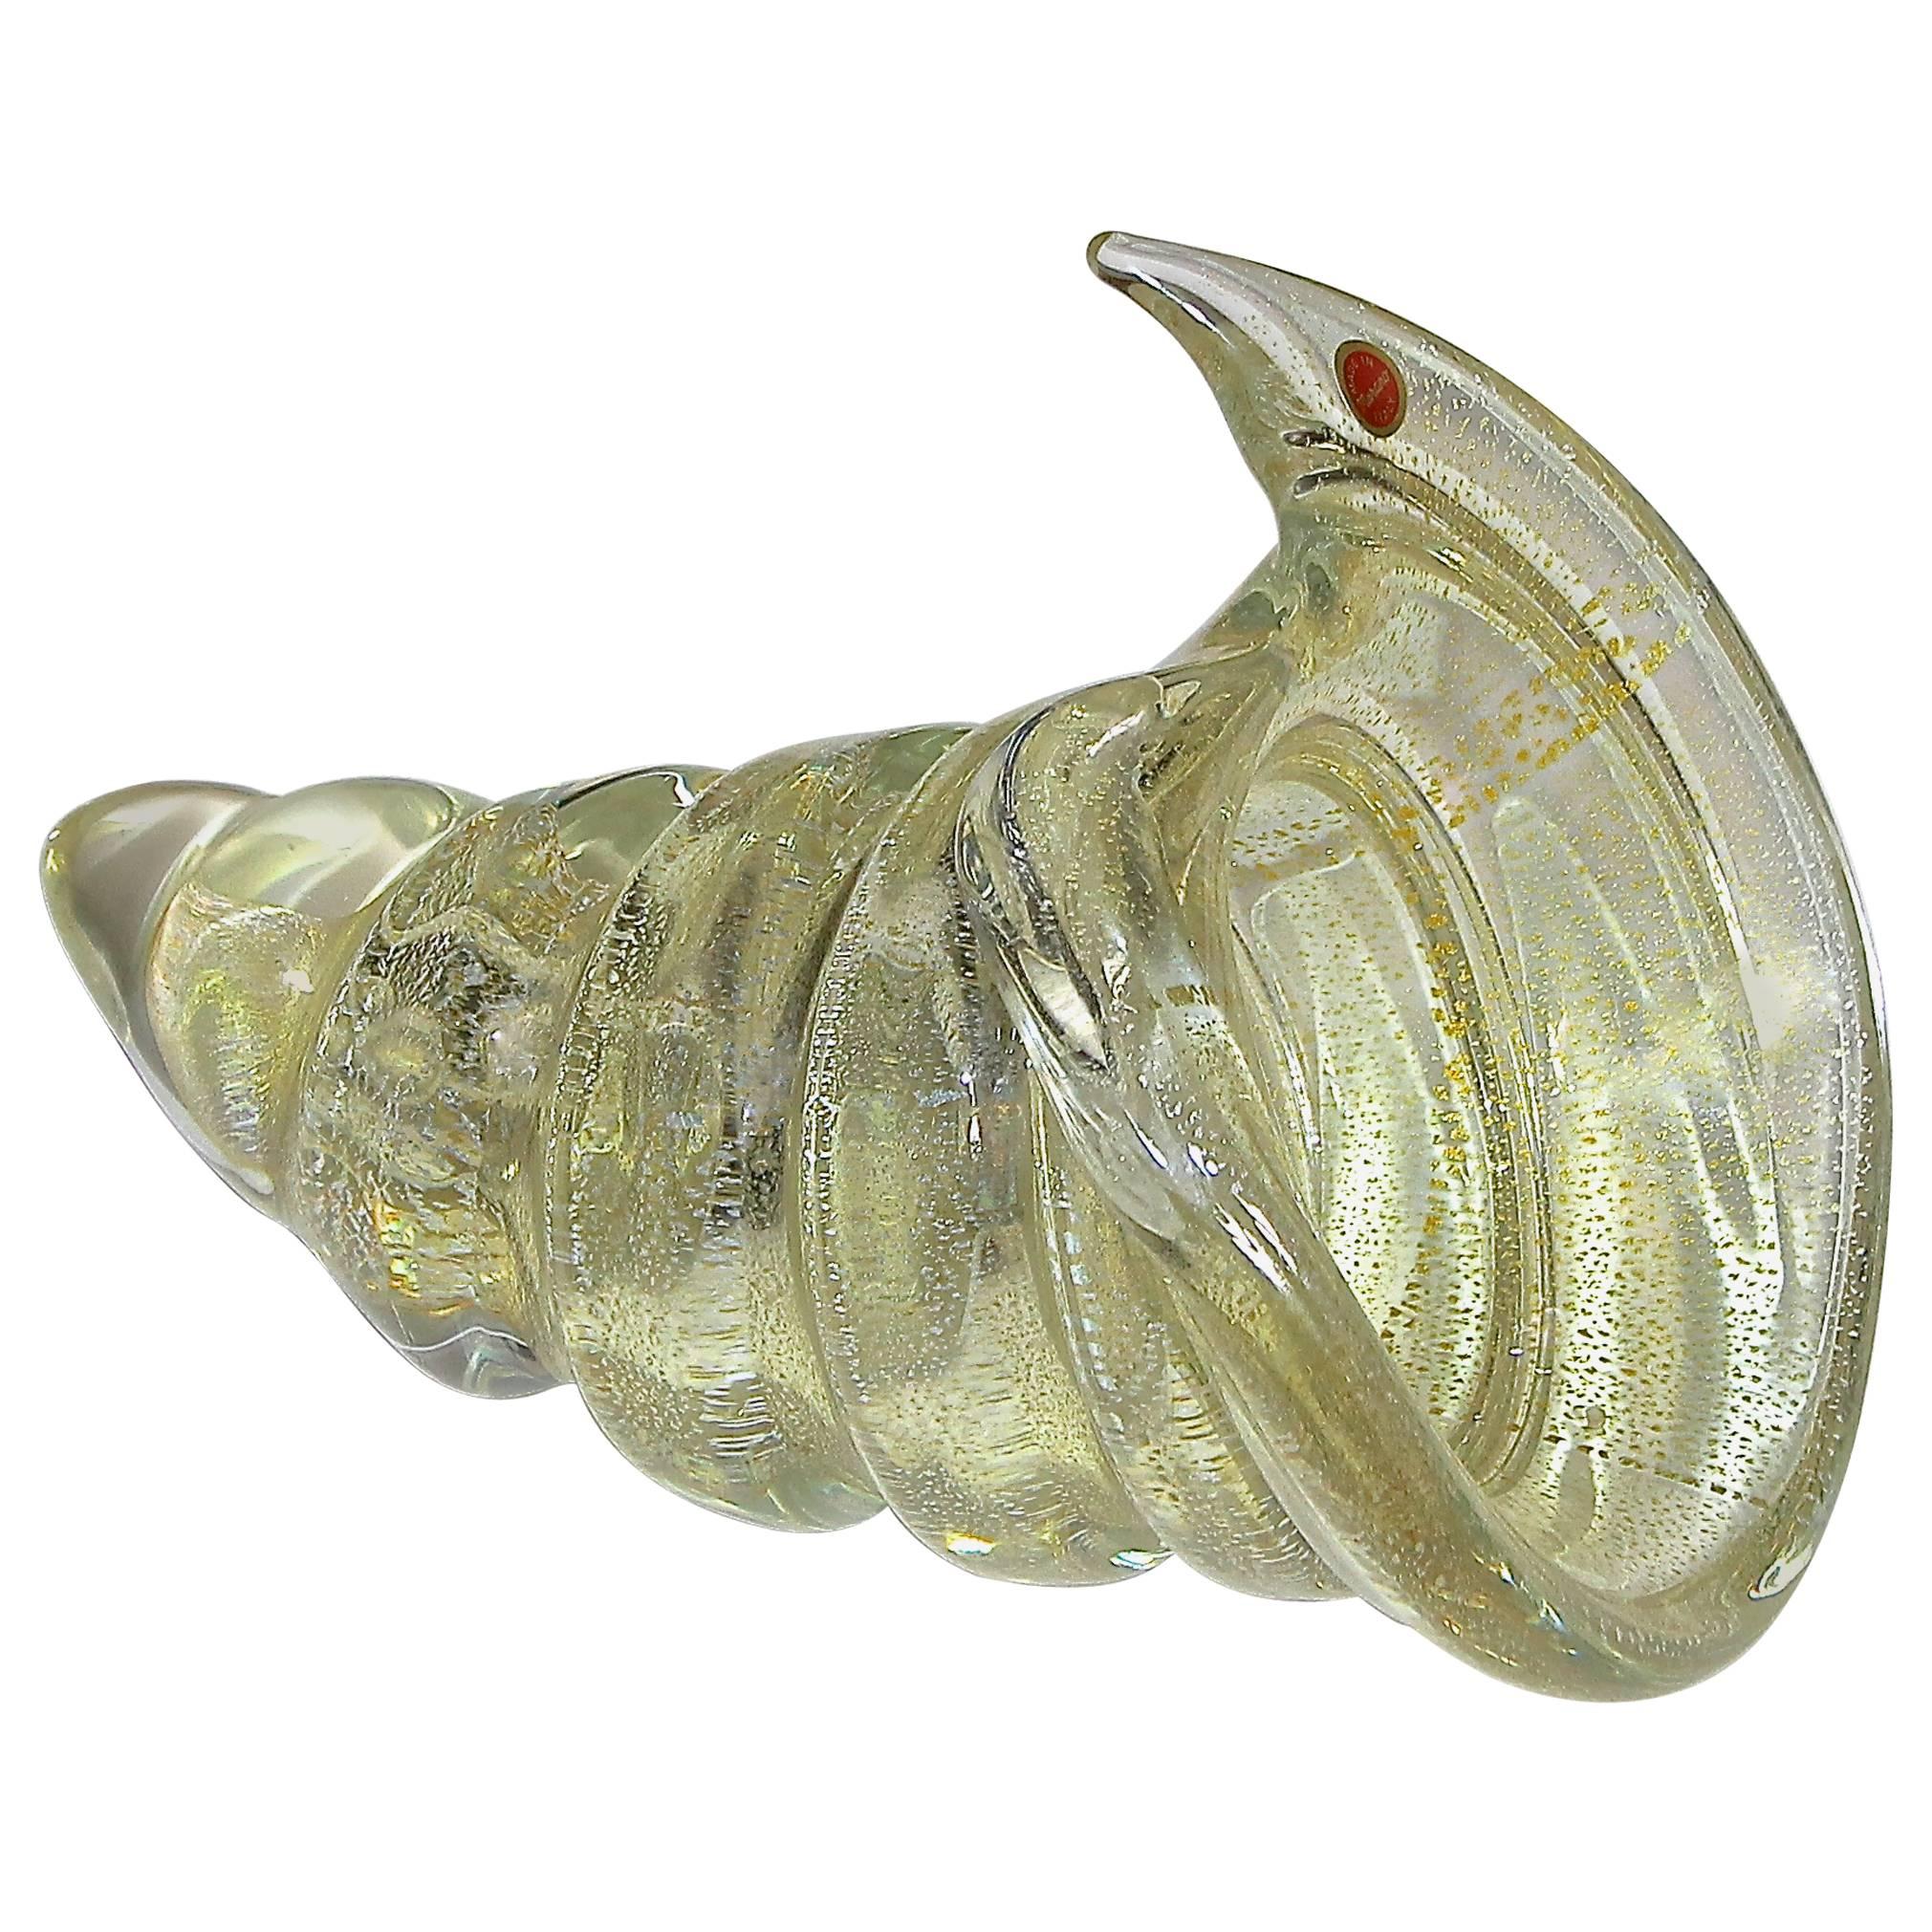 Extra Large Seashell Shaped Centerpiece Bowl By Yalos For Murano Glass At 1stdibs Large